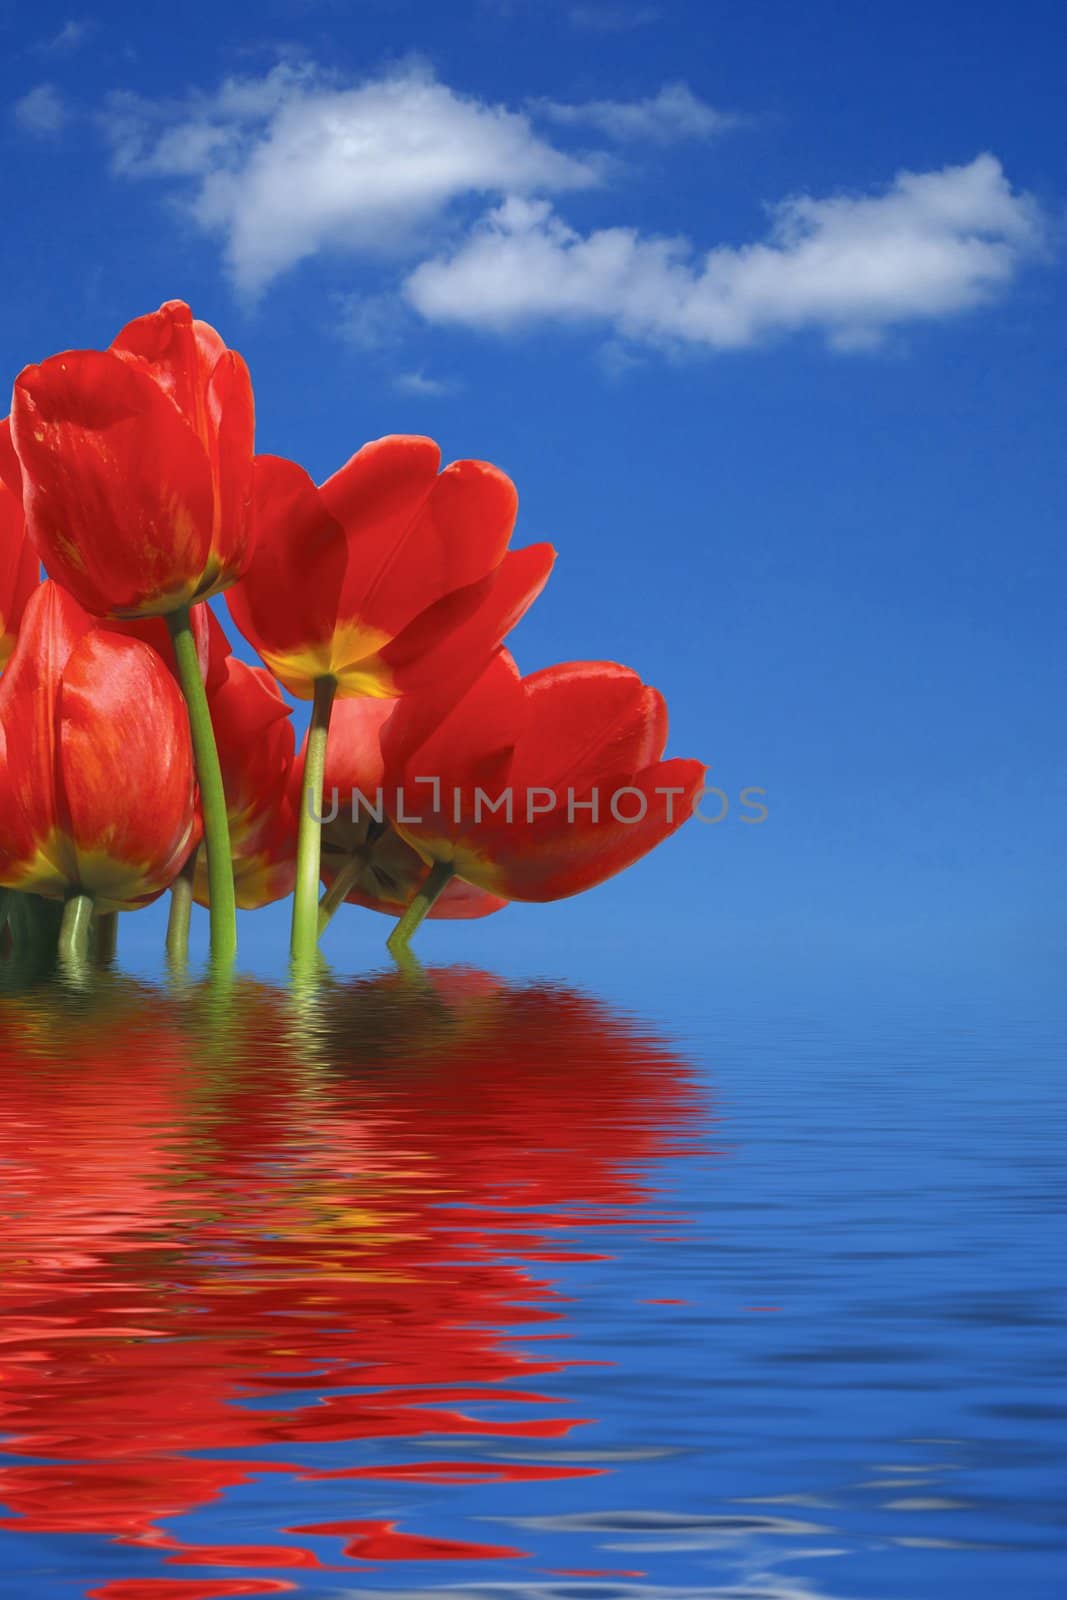 Tulips on background of blue sky with white clouds